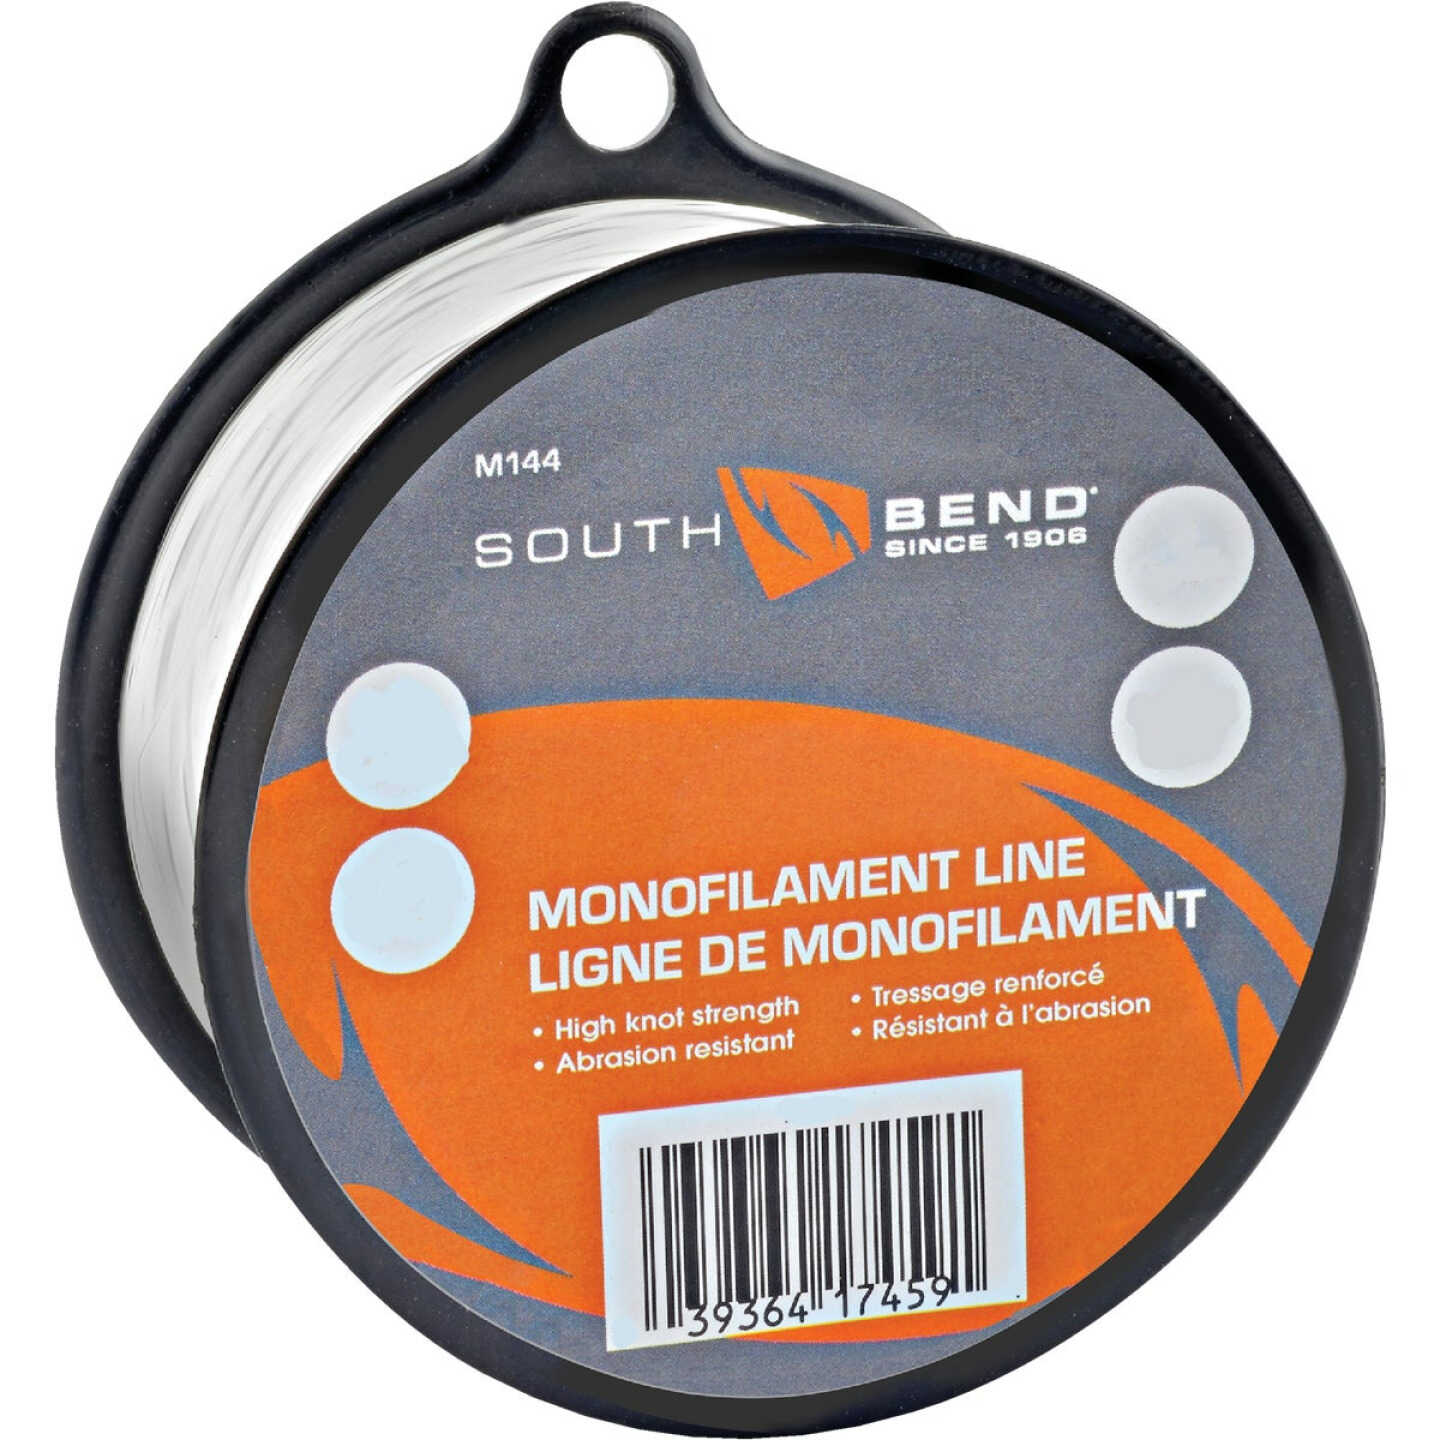 SouthBend 30 Lb. 180 Yd. Clear Monofilament Fishing Line - Knapp